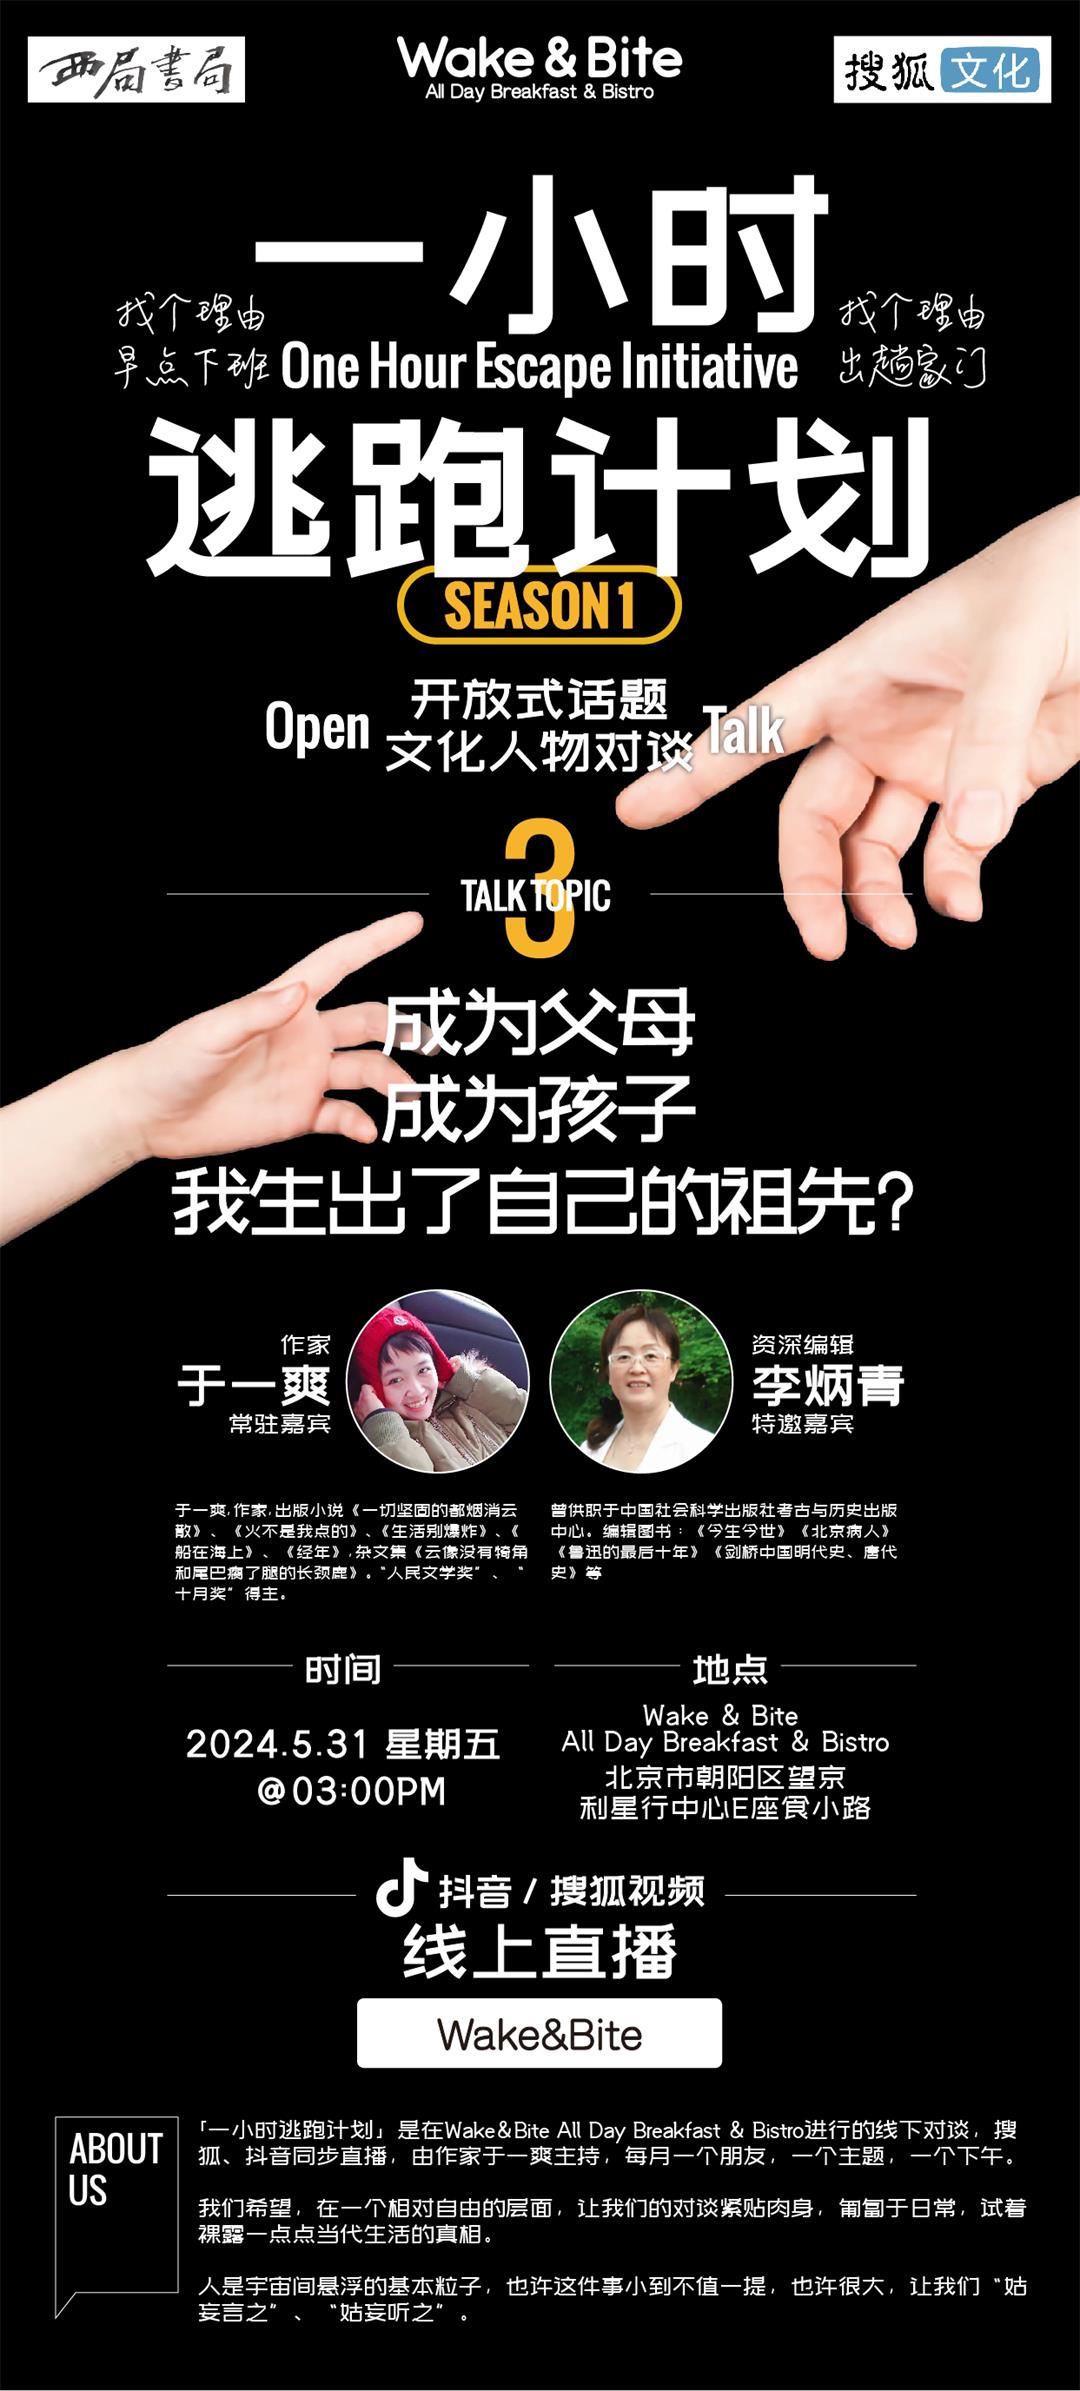 One Hour Escape Initiative Poster S1T3_画板 1 副本 3.jpg